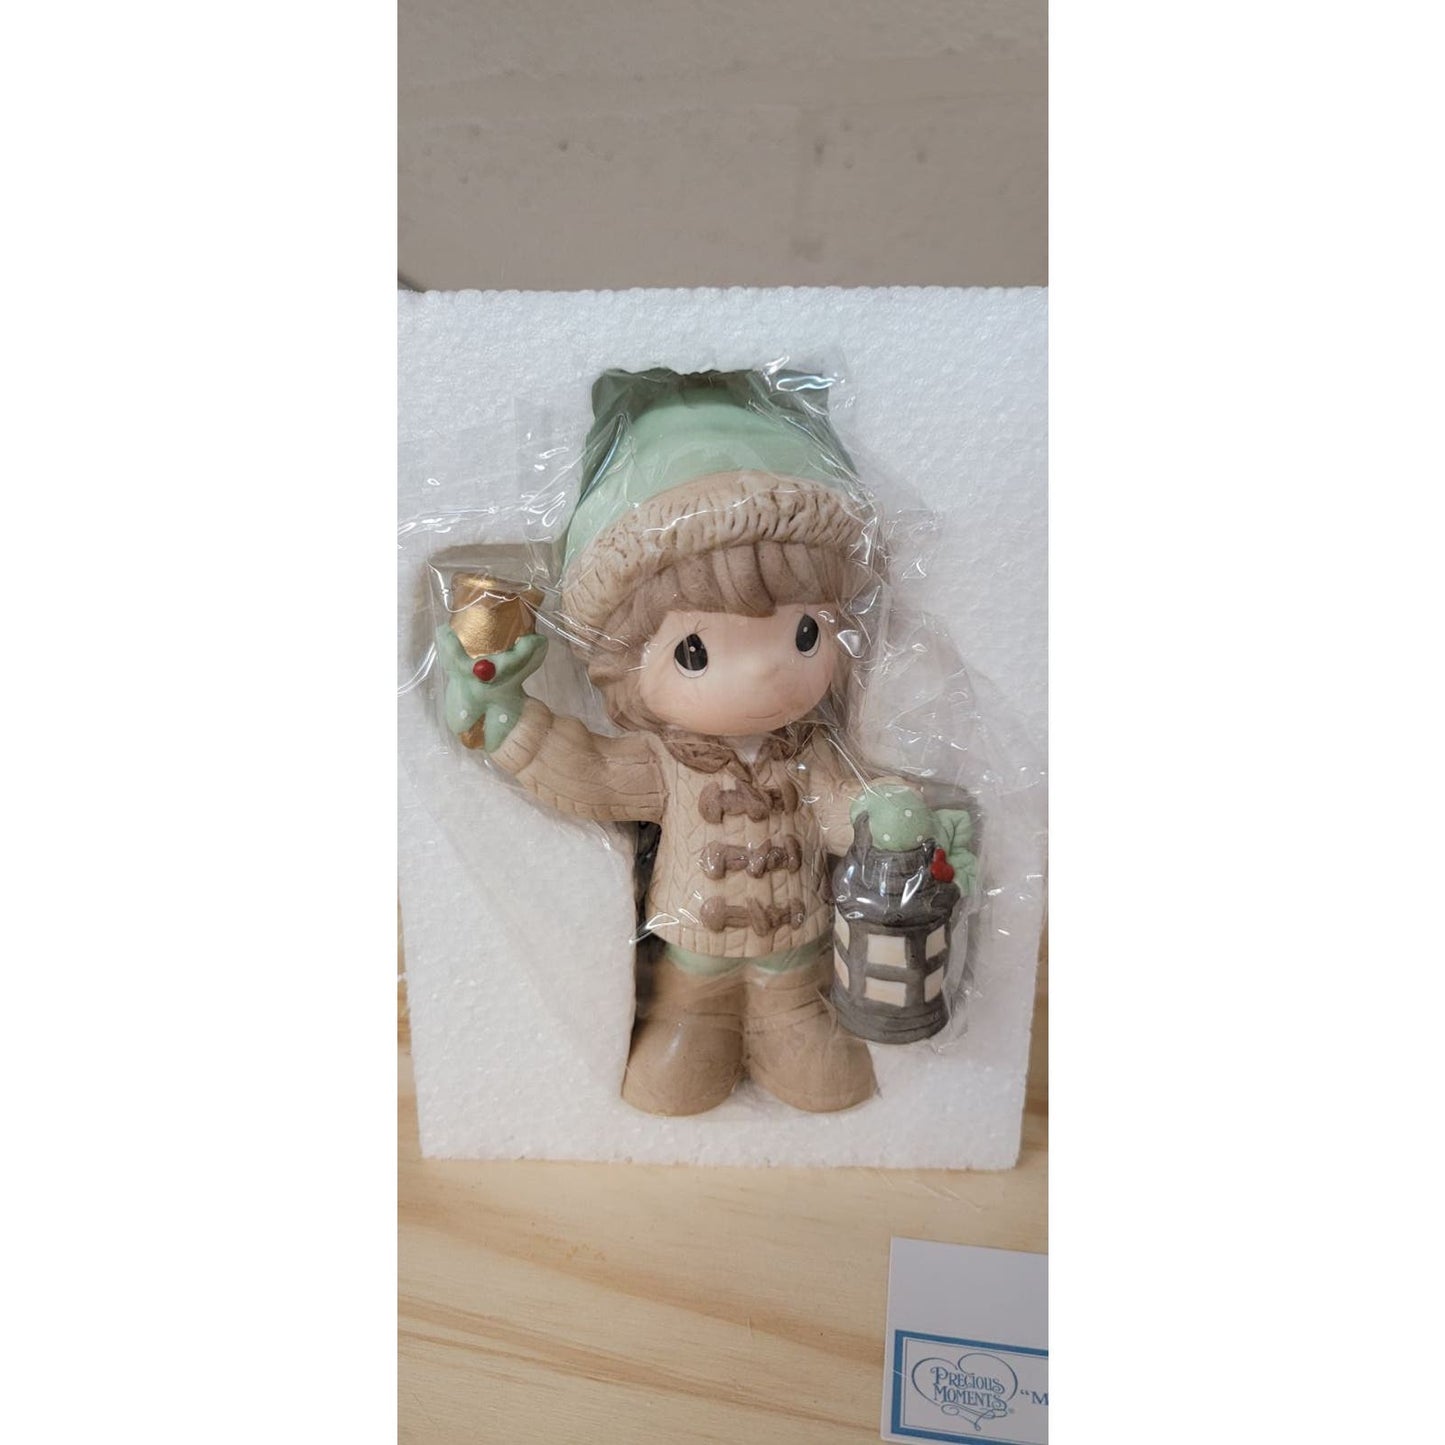 New in Box Precious Moments Figurine: May Your Christmas Be Bright